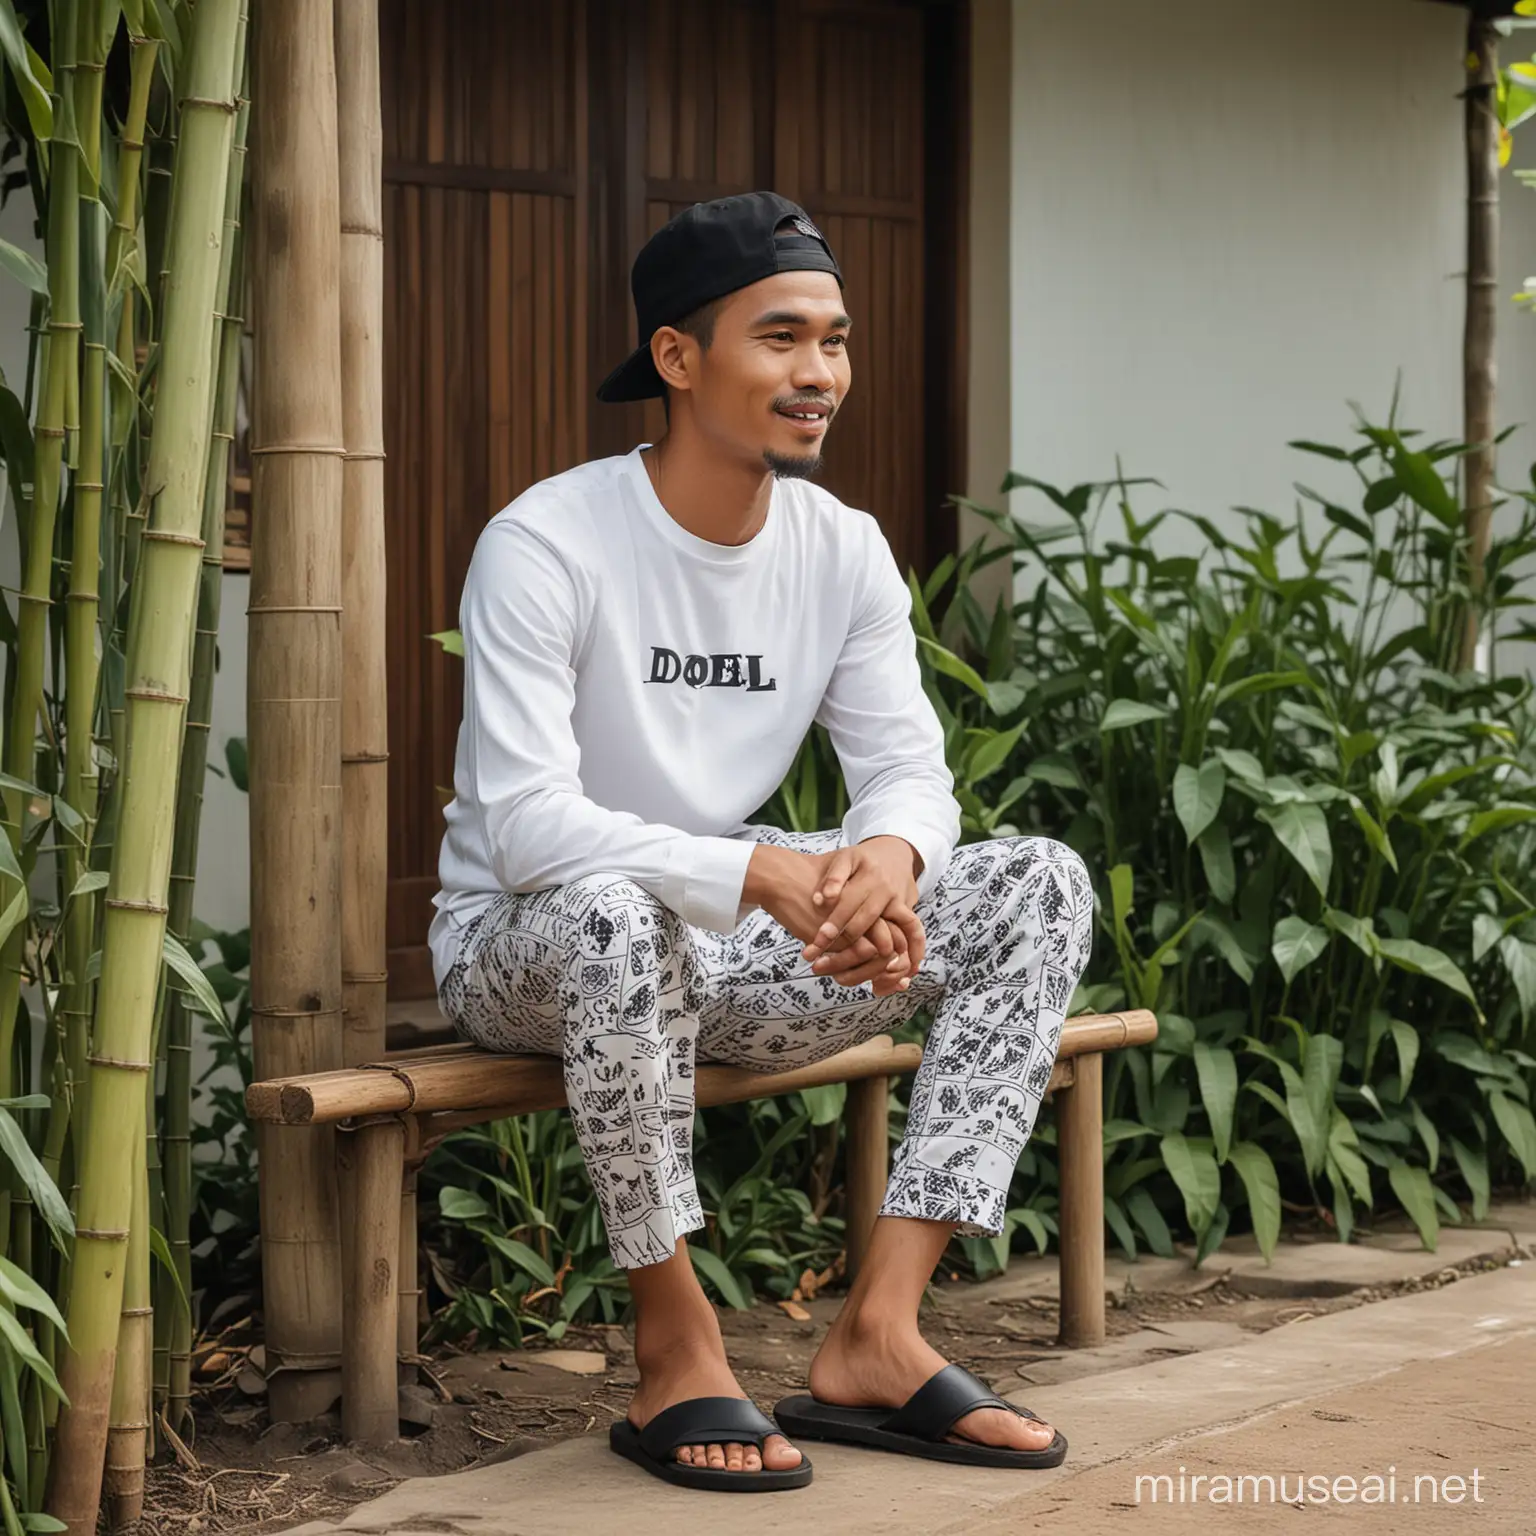 Photo of an Indonesian man (30 years old, wearing a black cap, long and clean face, smooth face, skinny body, wearing a white shirt with the word 'Doel' written on it, wearing white patterned batik pants, black leather sandals), smoking, the man is seen relaxing sitting on a bamboo bench in the front yard of a simple house with a cup of black coffee next to him (a boarding house with a Javanese joglo-style house design), rural atmosphere, bright front, cinematic, best angle, with a background of chickens and an old bicycle leaning against the house